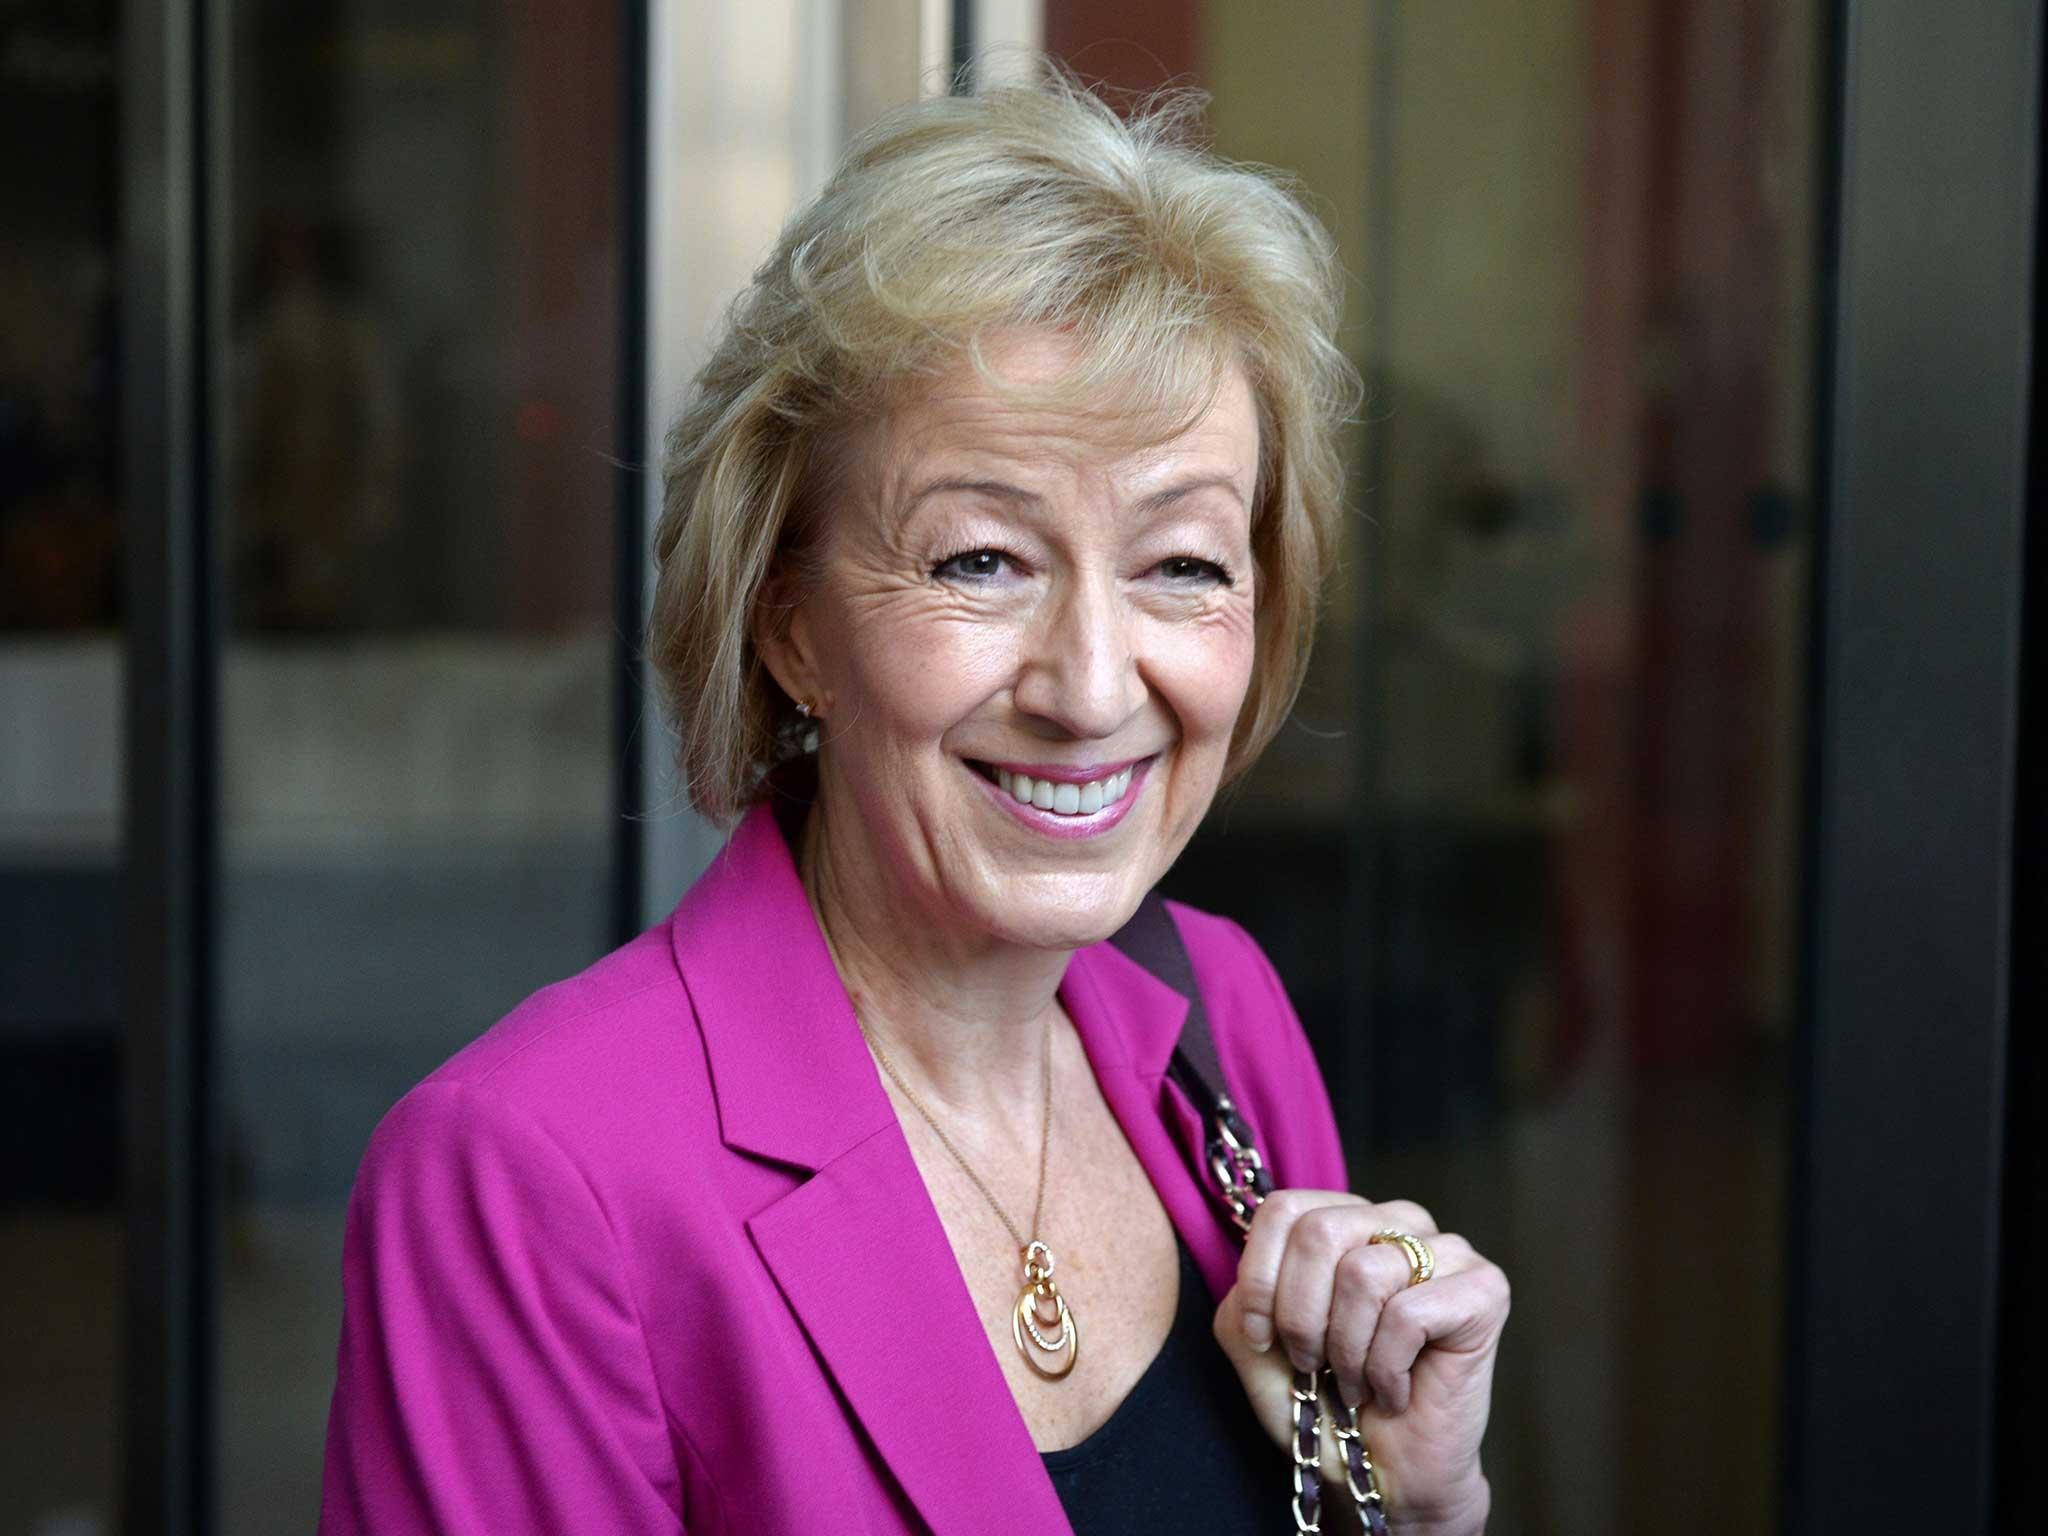 Andrea Leadsom said her children meant she was better suited to be Prime Minister